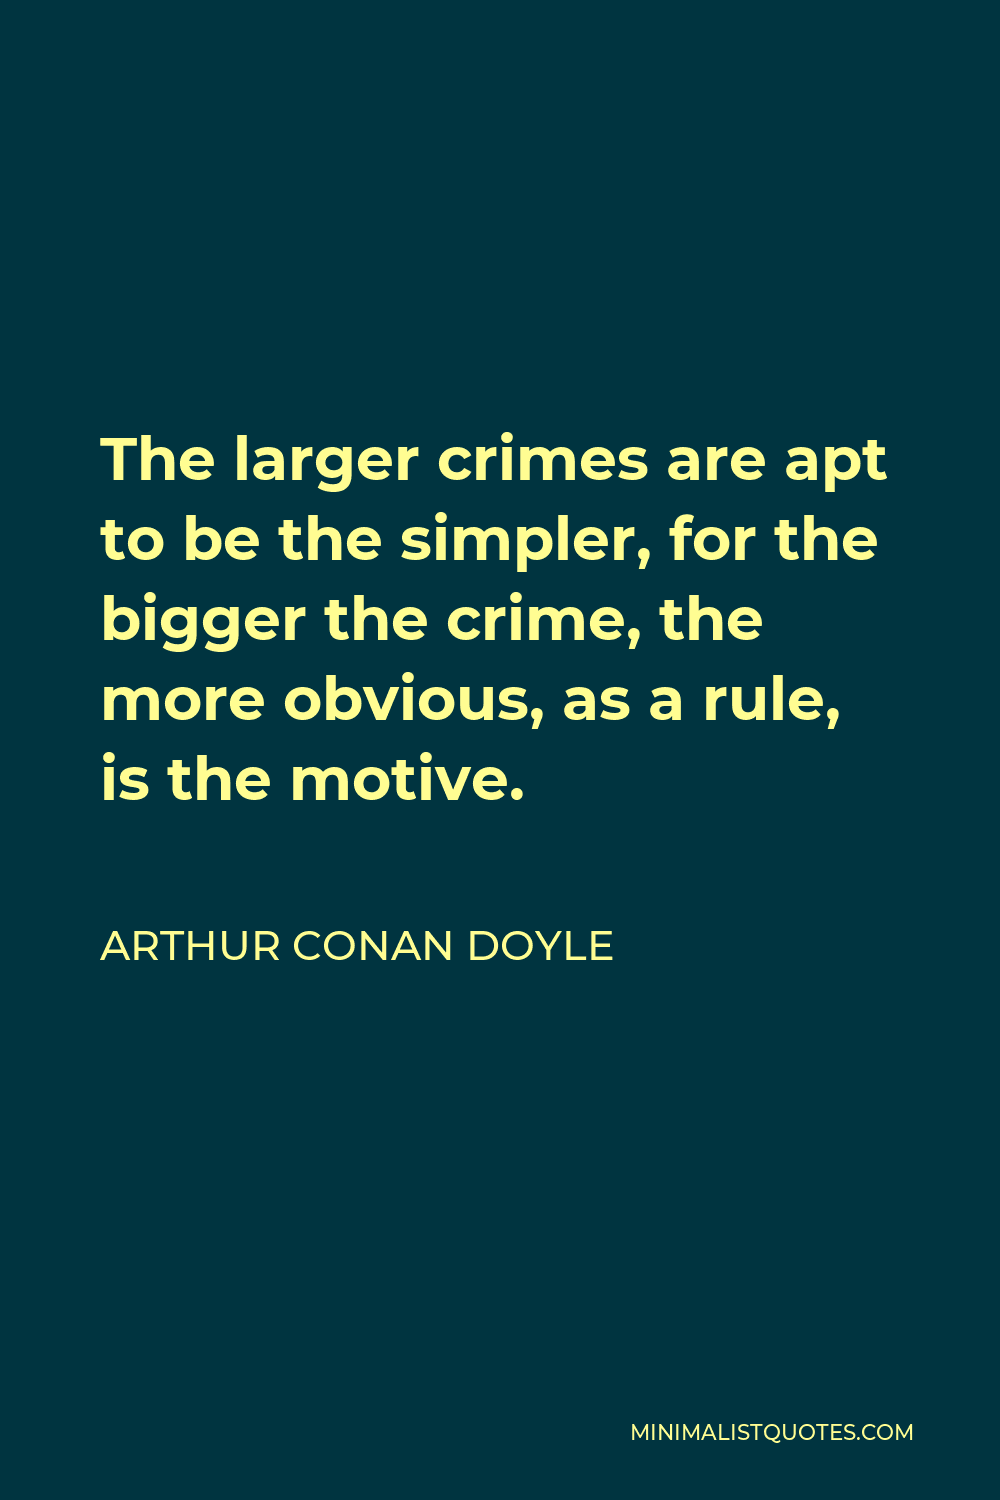 Arthur Conan Doyle Quote - The larger crimes are apt to be the simpler, for the bigger the crime, the more obvious, as a rule, is the motive.